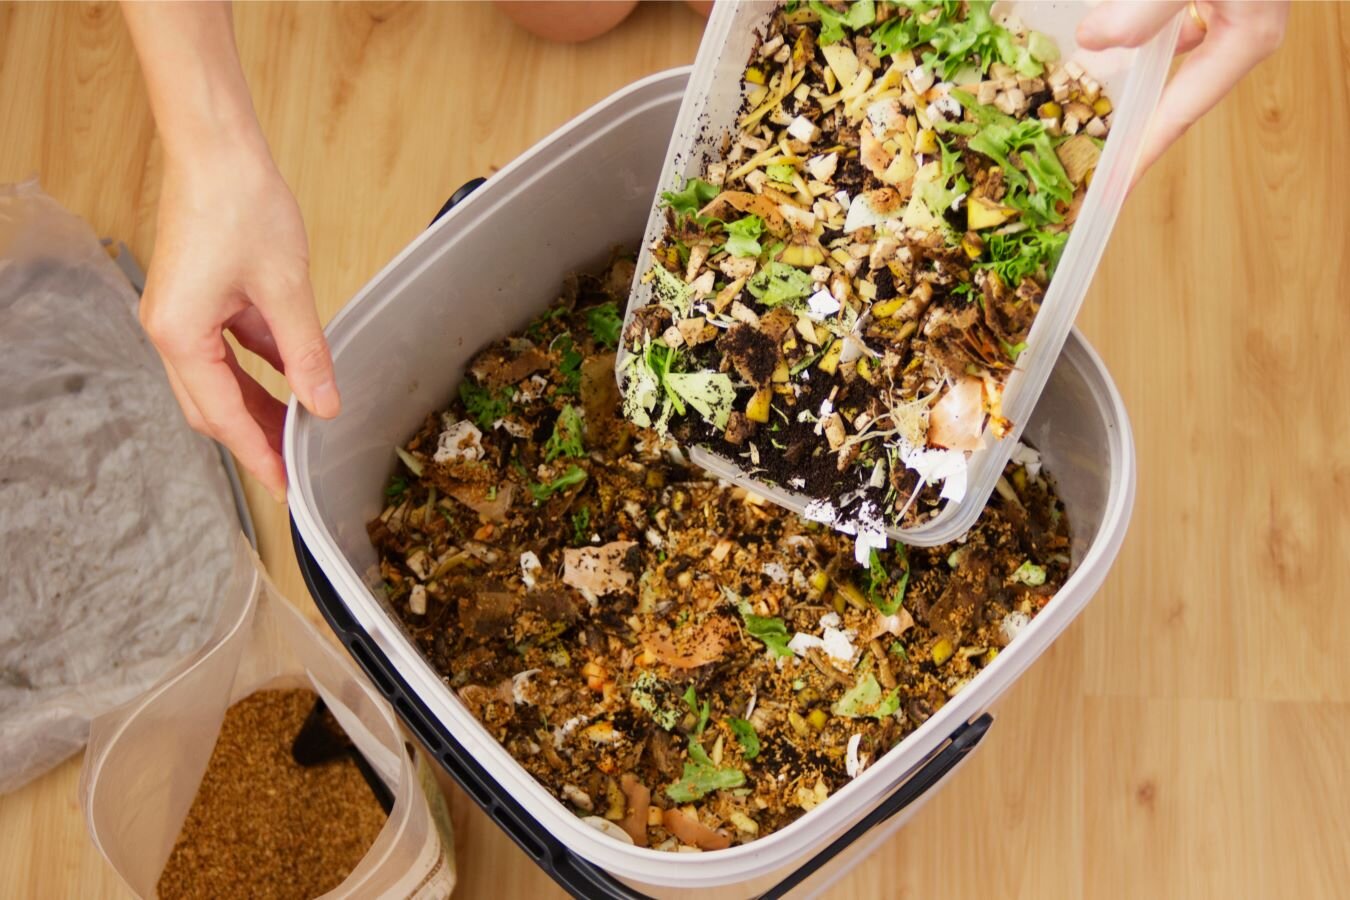 Bokashi Composting 101. Dramatically Cut Your Families Waste. — Living Green